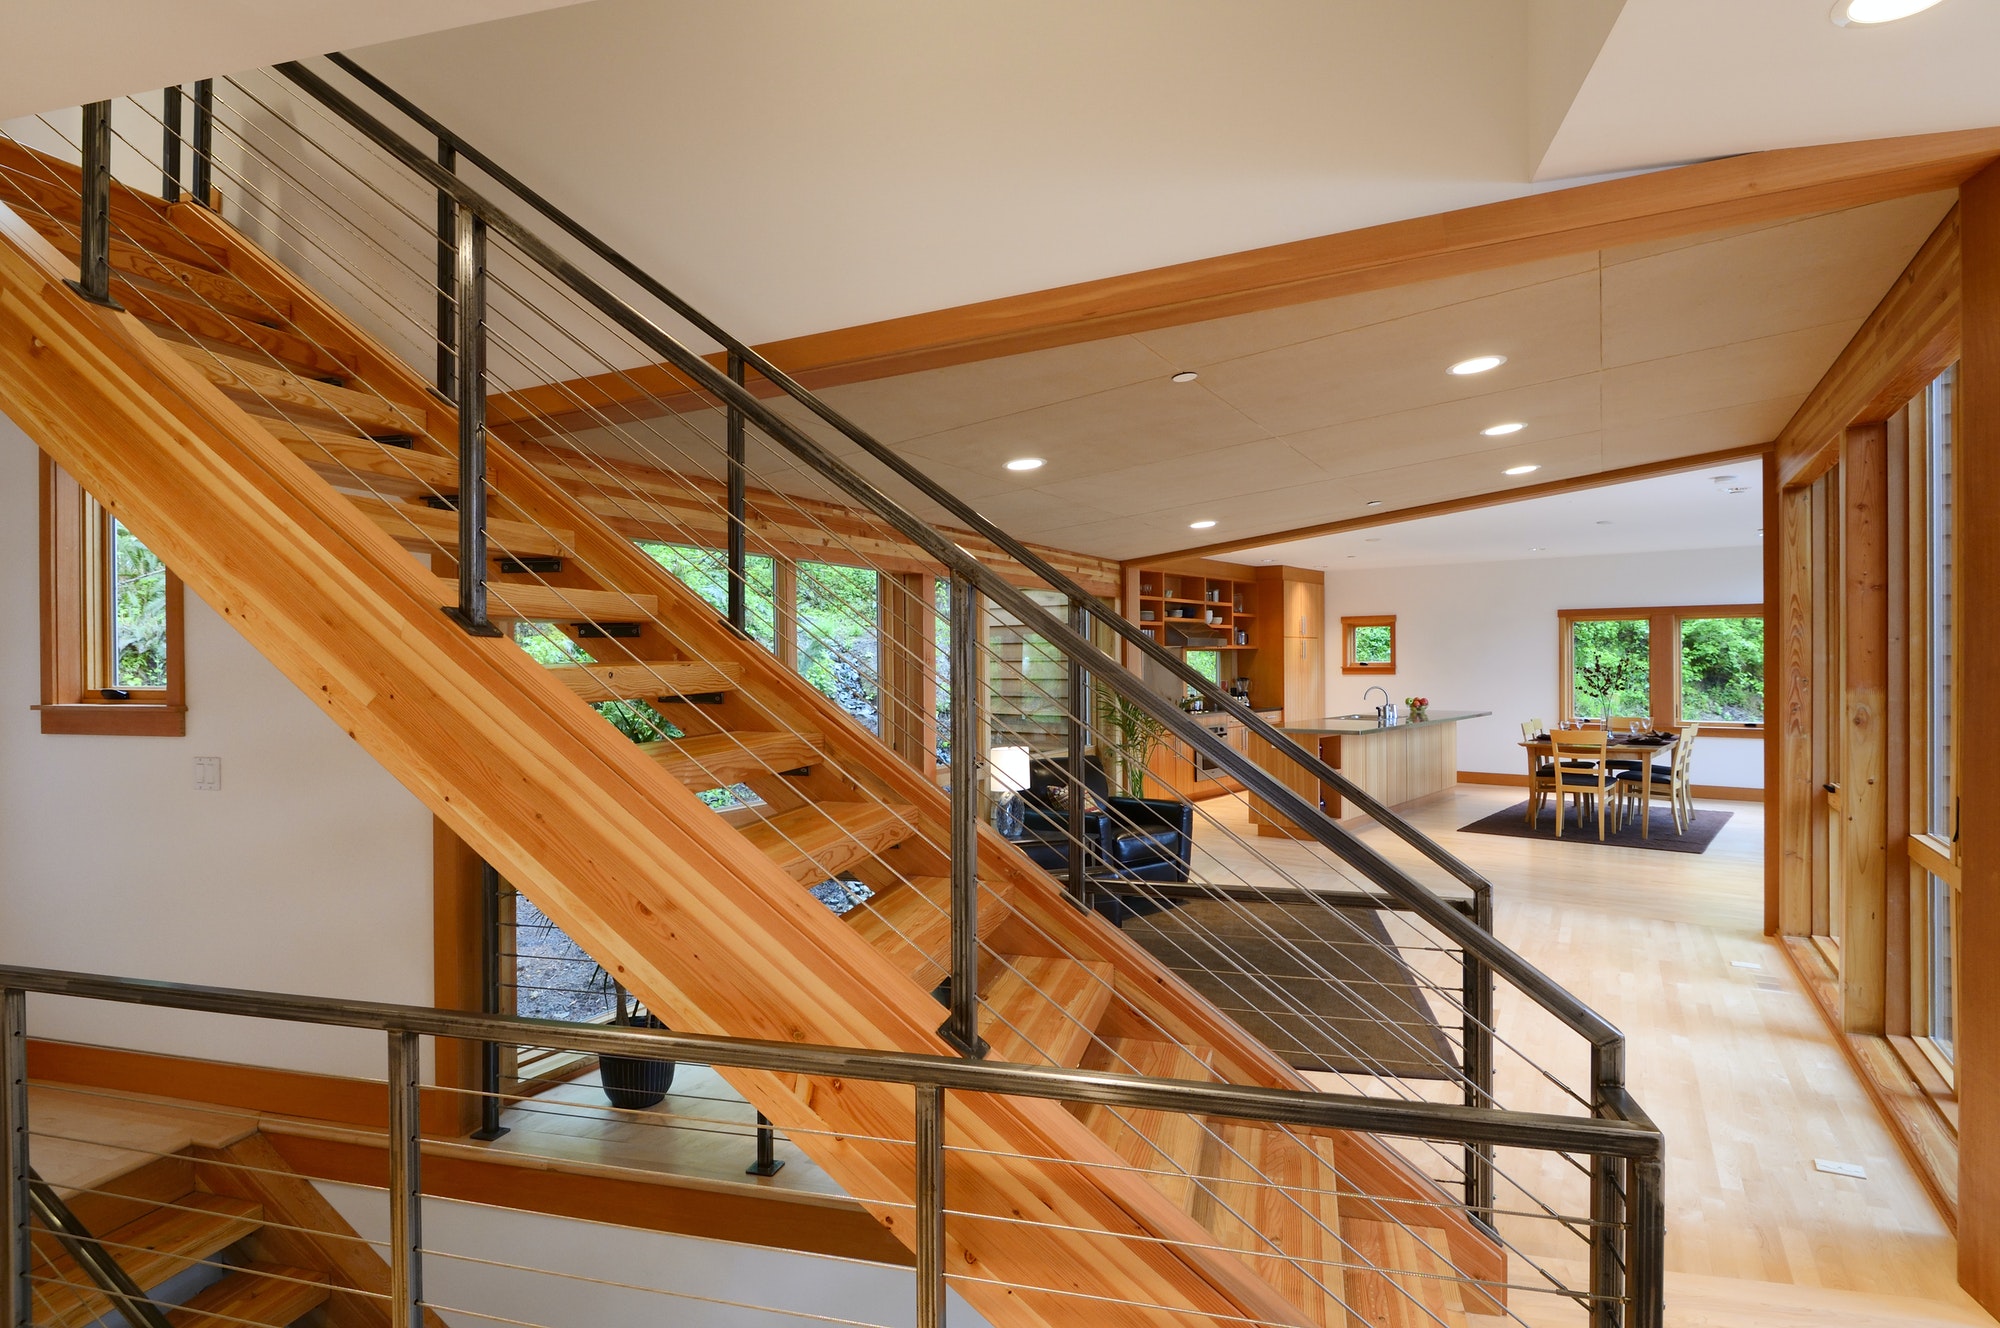 54208,Wooden staircase in modern home